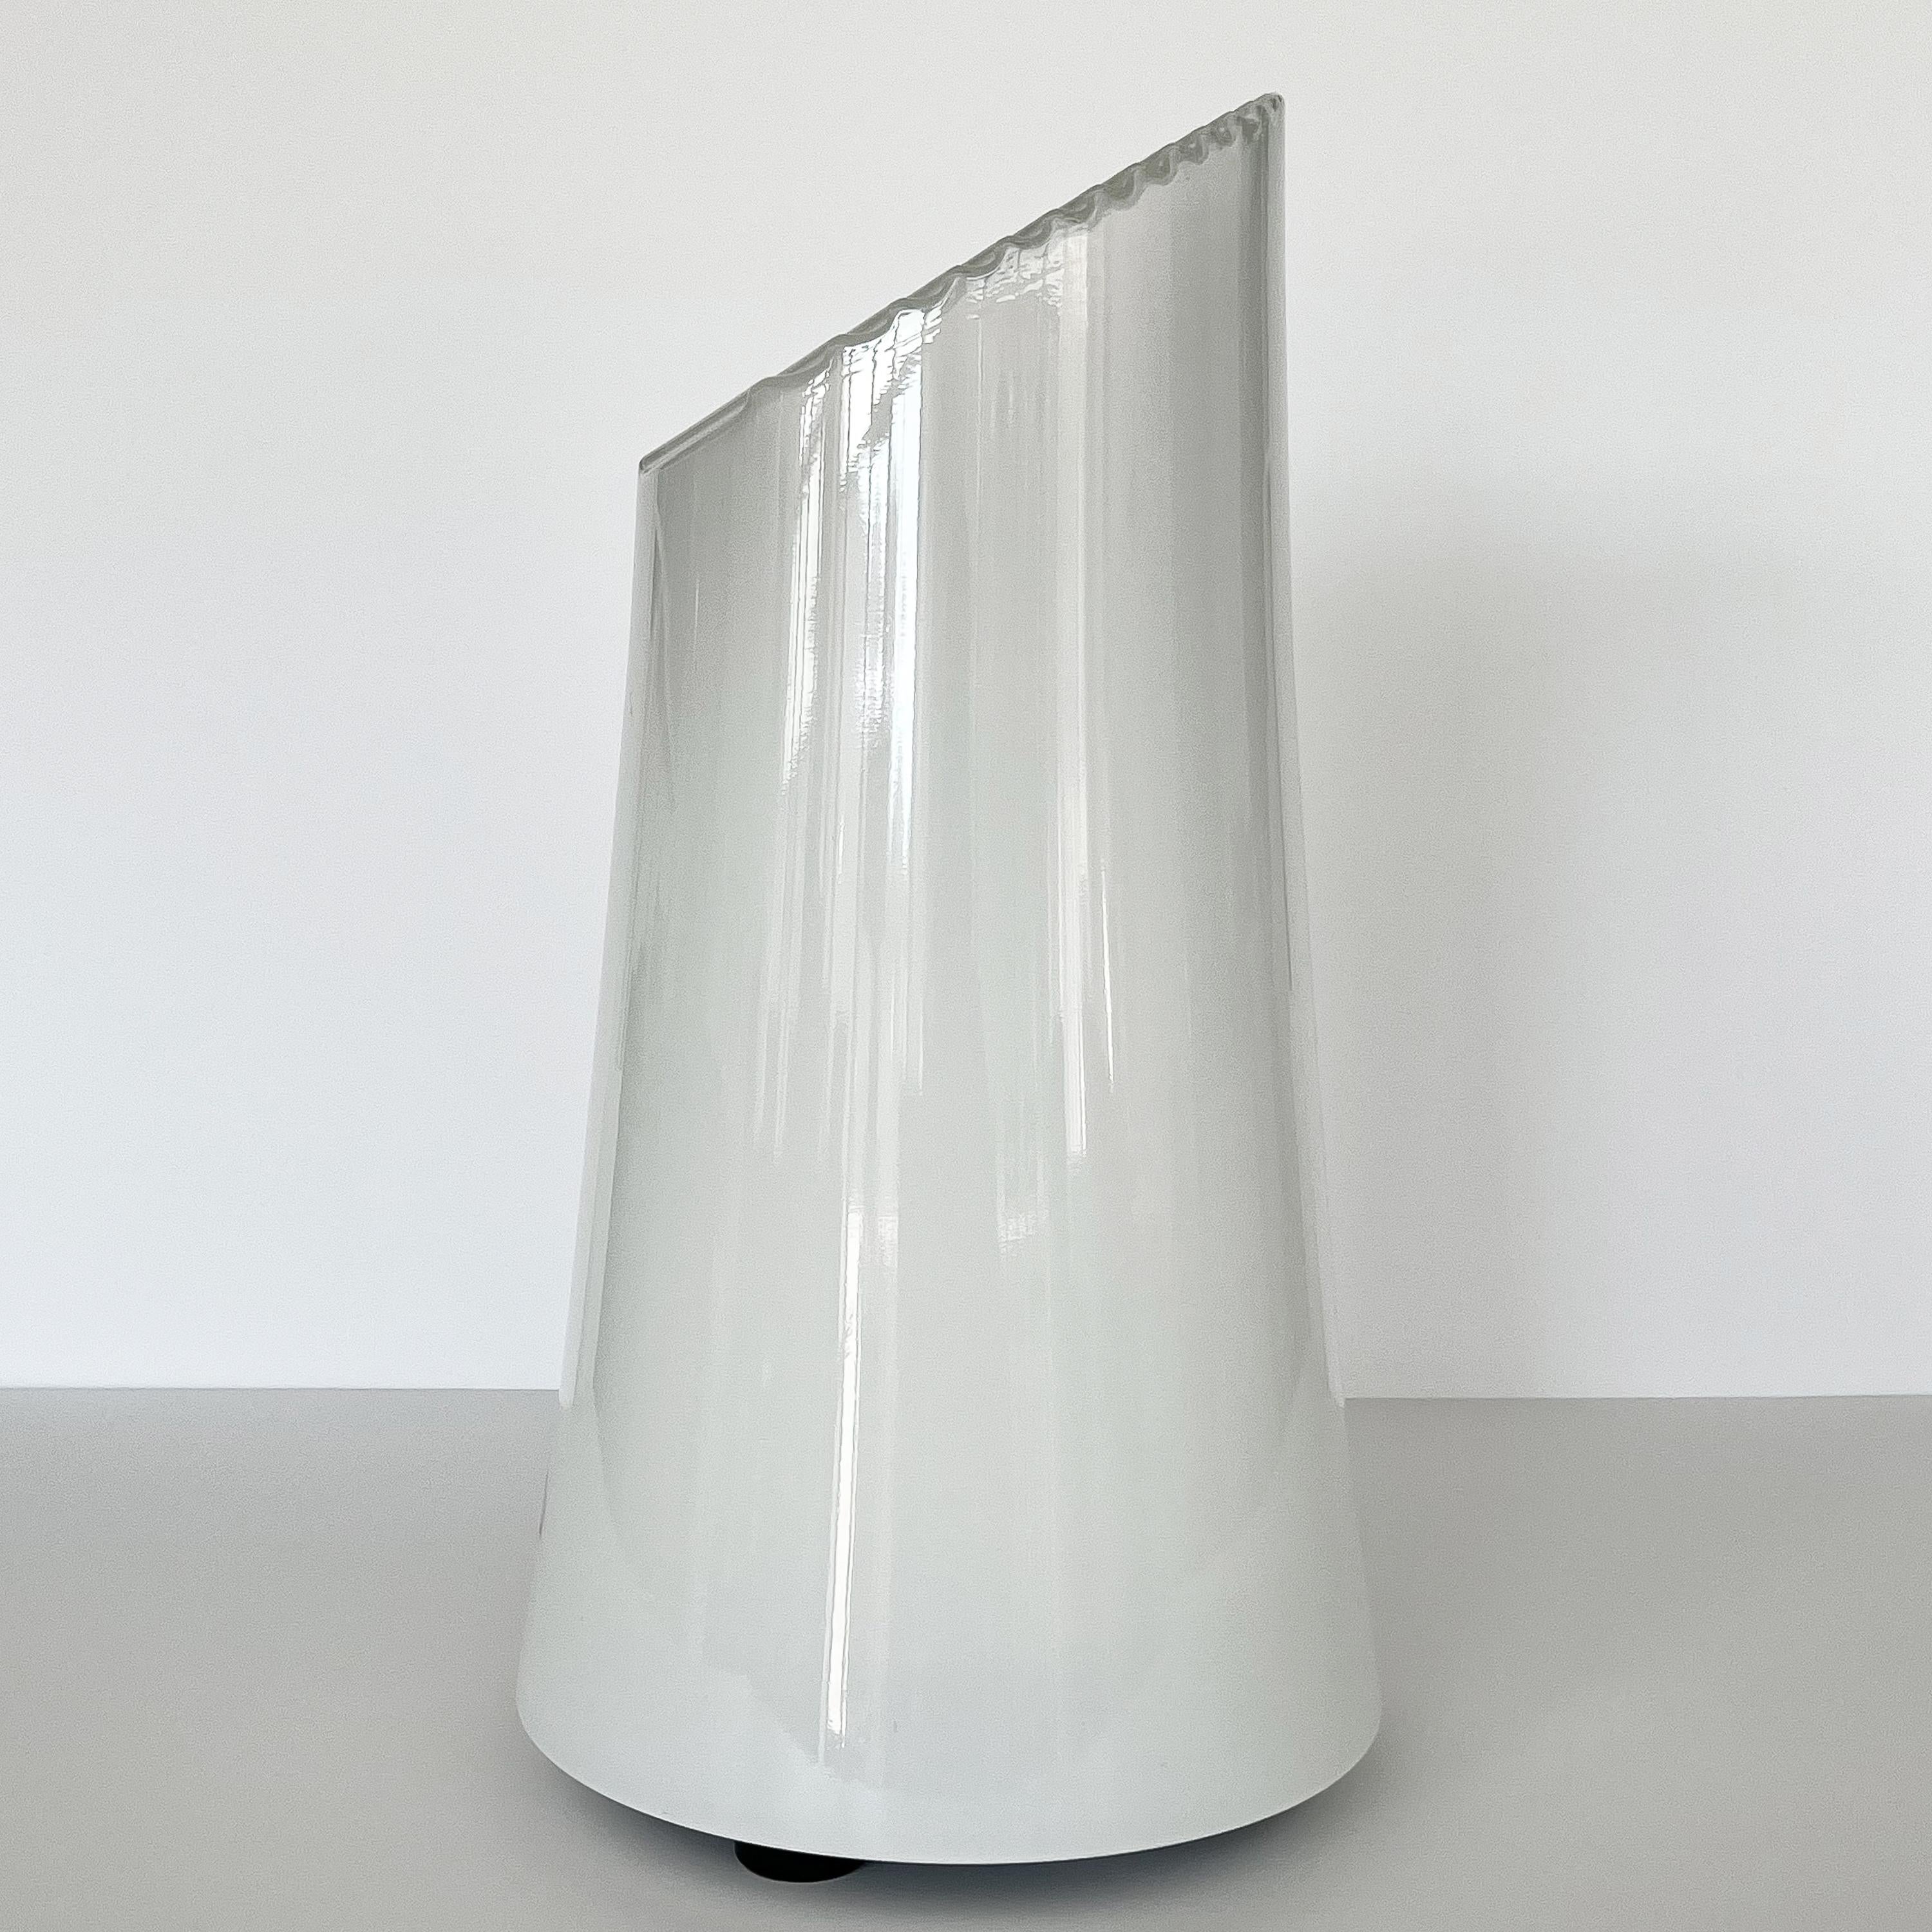  Sculptural Italian White Cased Glass Table Lamp by ITRE 1